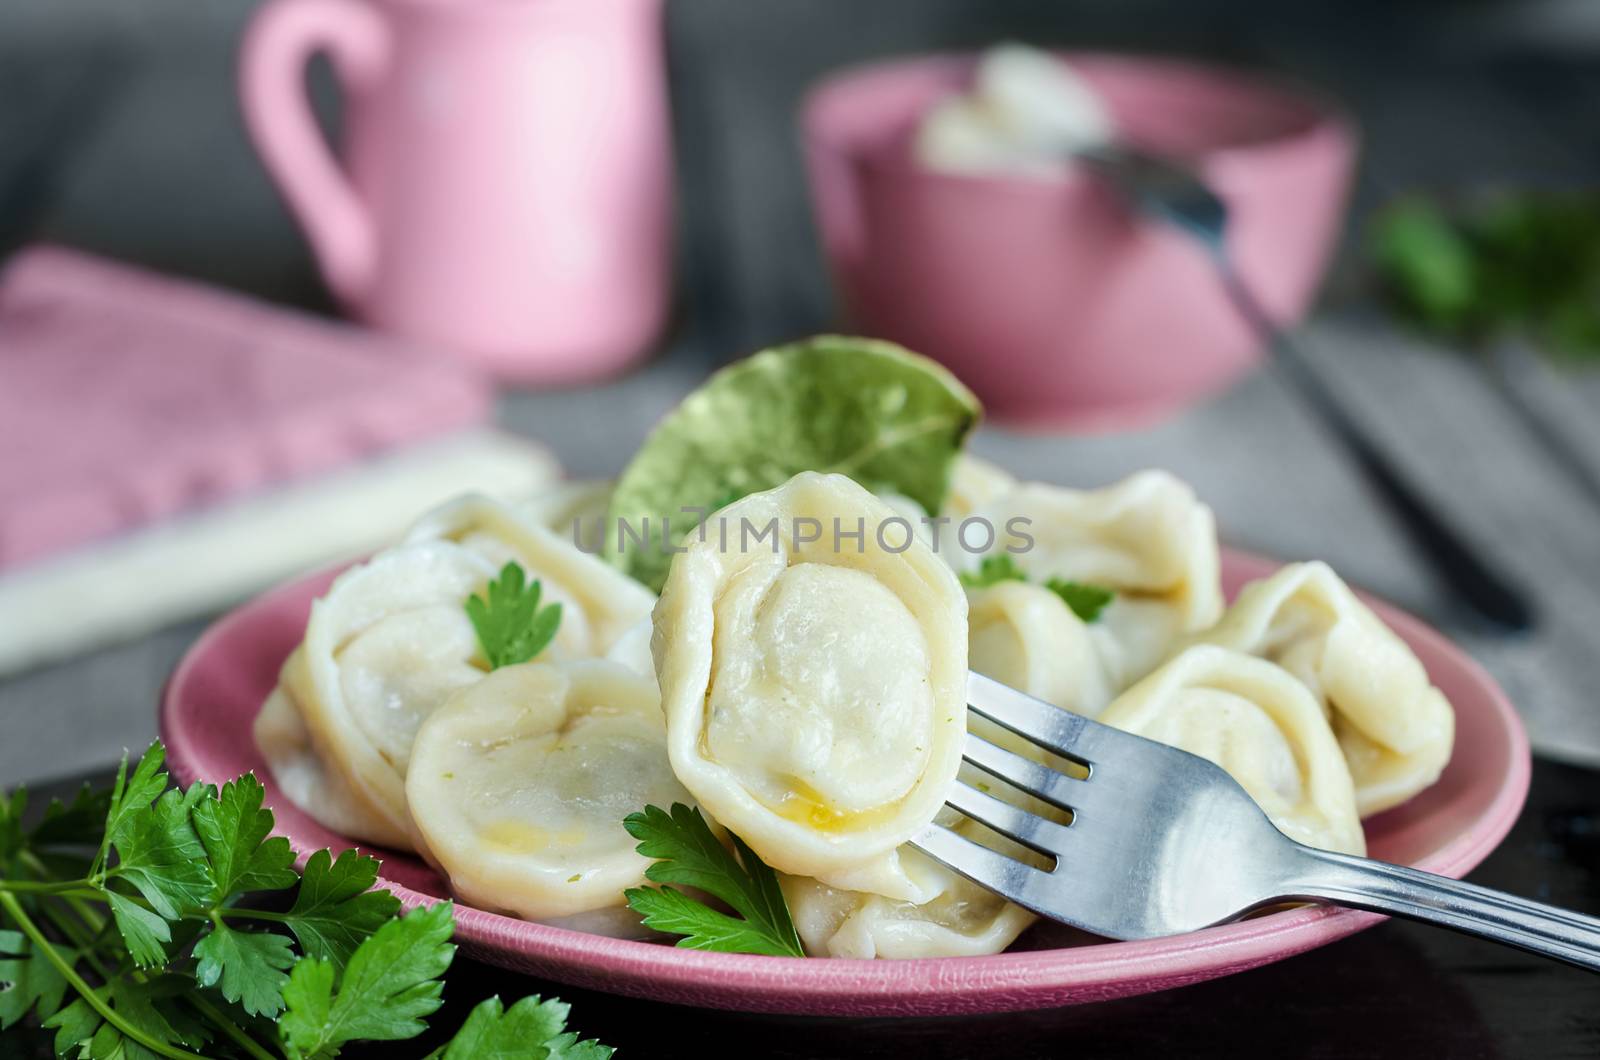 Dumplings on the plate and fork by Gaina